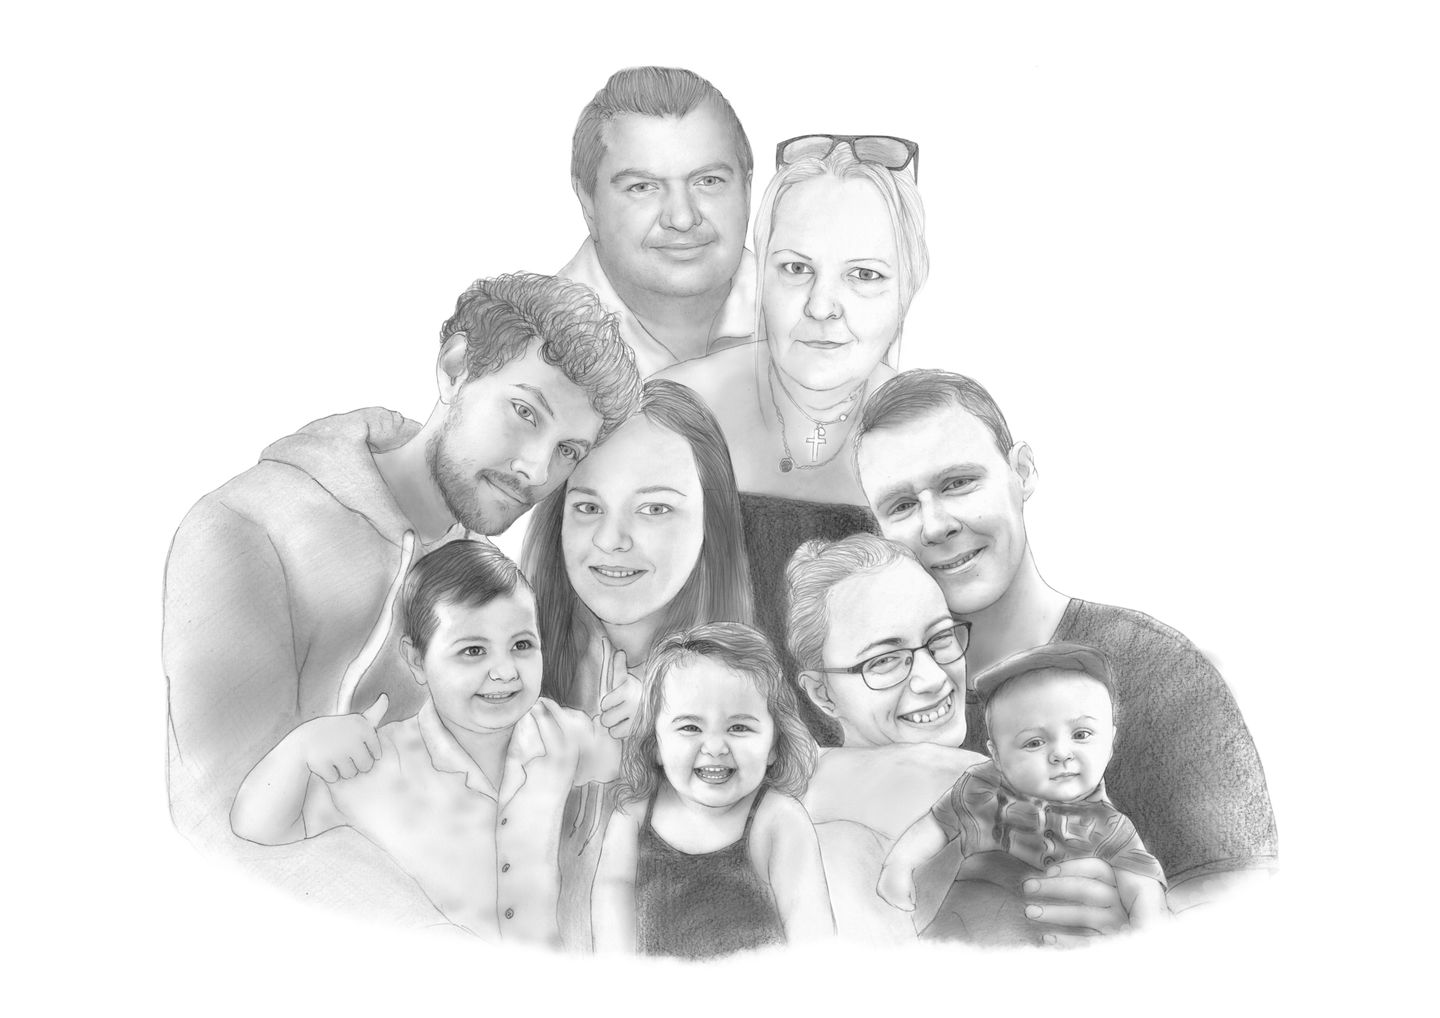 Black and white Family Portrait on 30cm x 40cm print - Charlie's Drawings